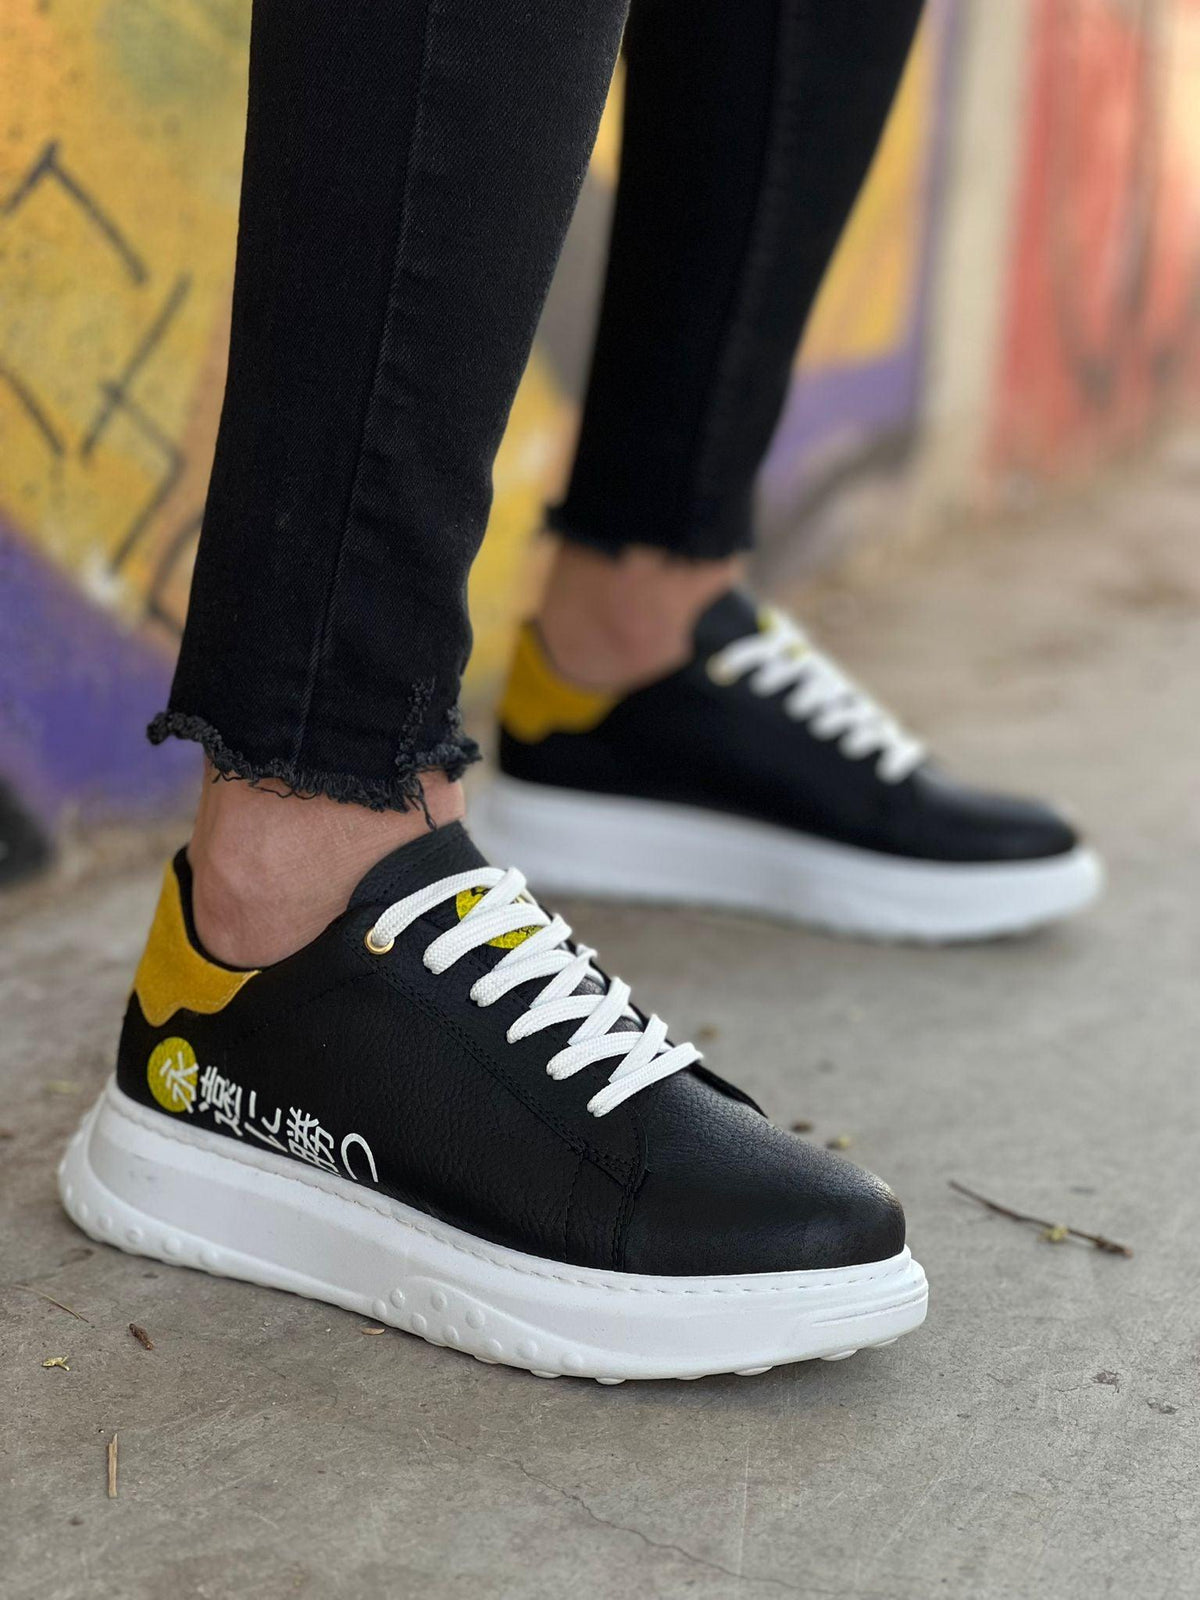 KB-172 Lace-Up Black Yellow Casual Men's Sneakers Shoes - STREET MODE ™